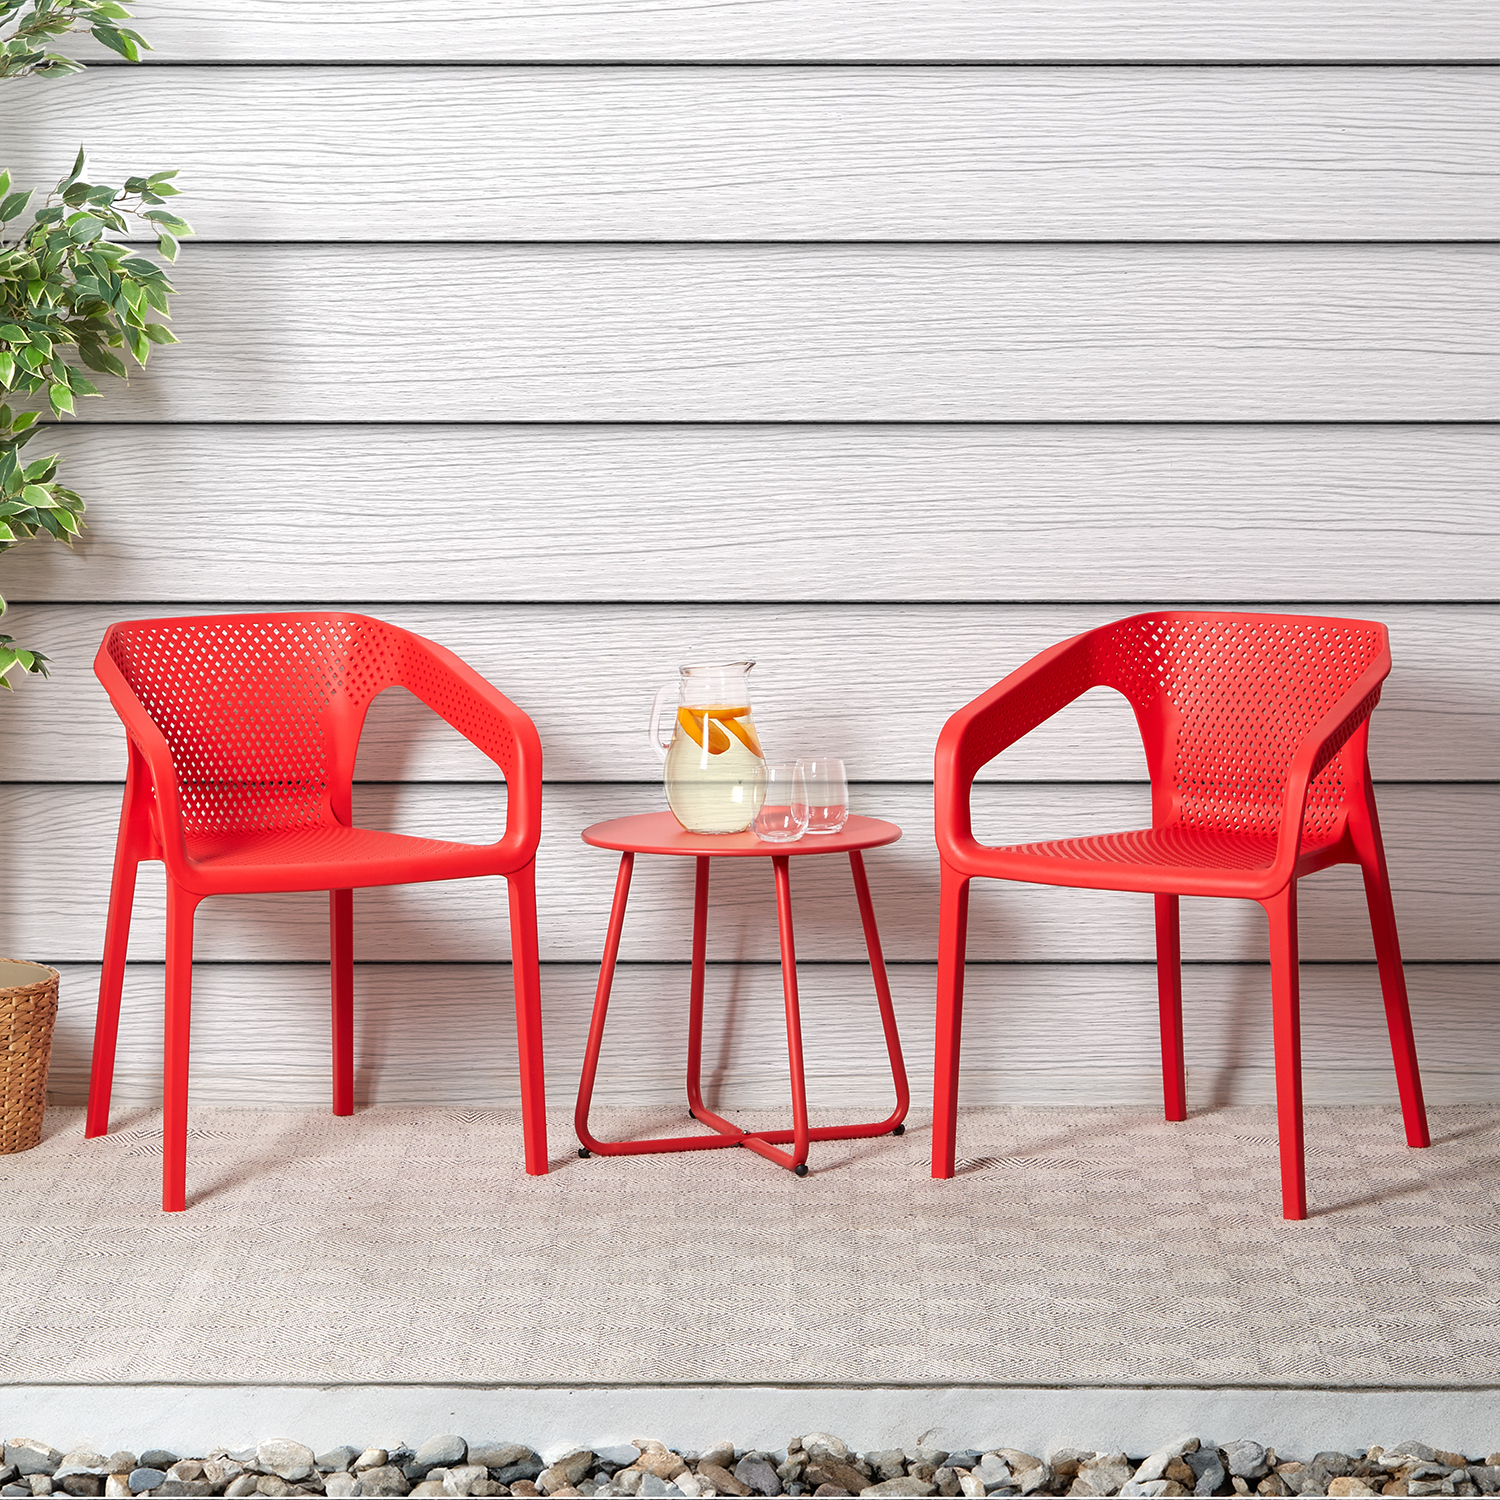 Set of 4 Garden chair with armrests Camping chairs Red Outdoor chairs Plastic Egg chair Lounger chairs Stacking chairs